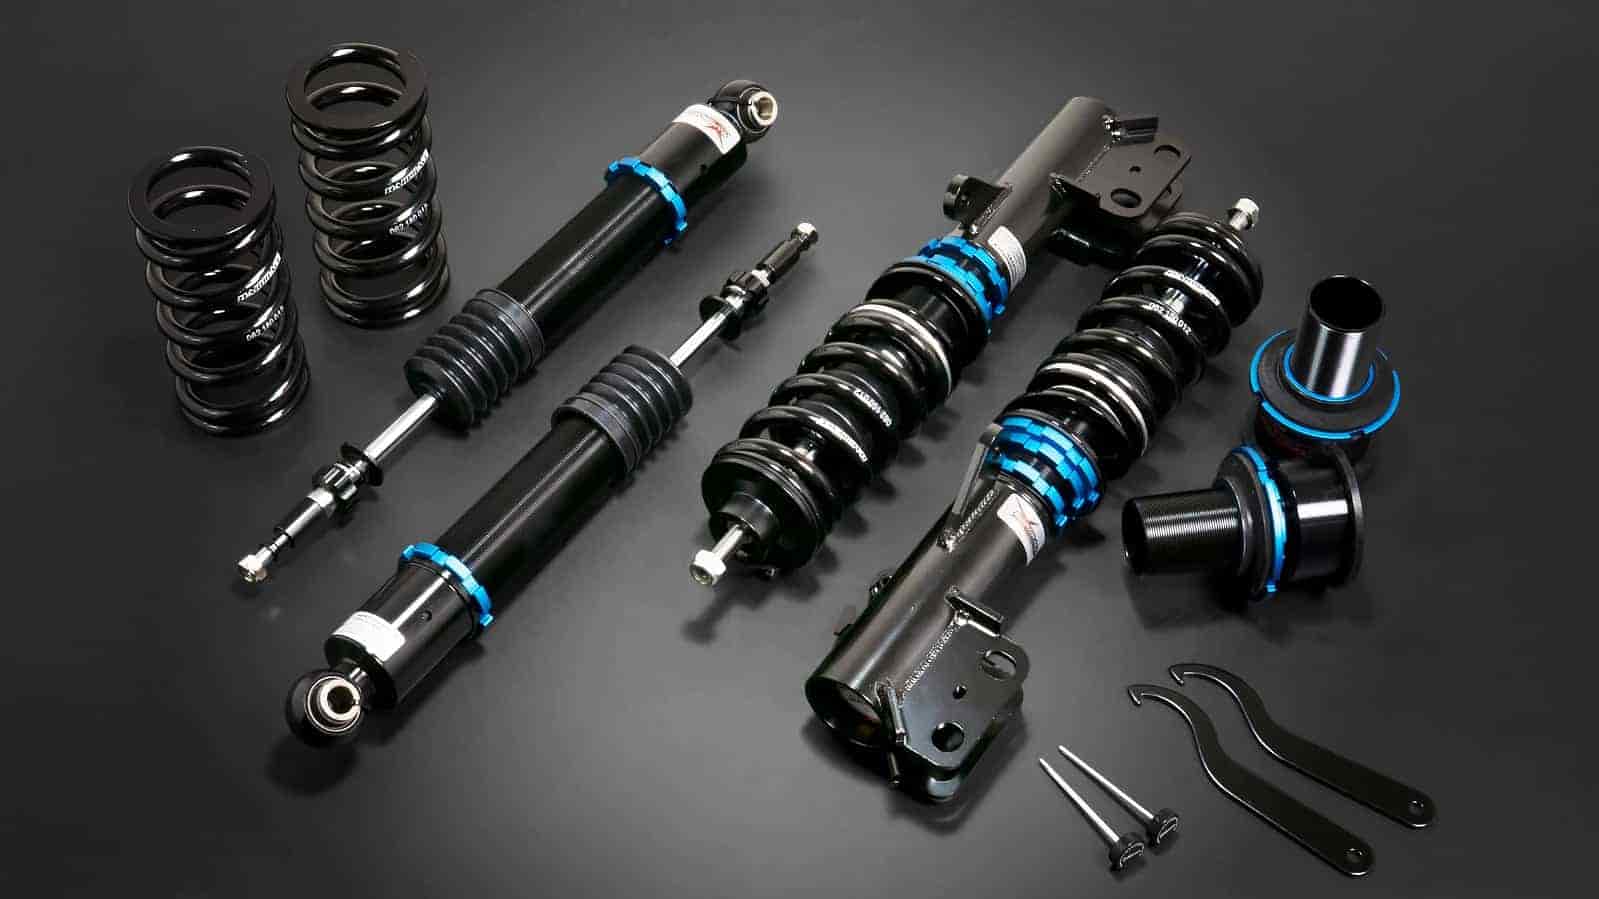 Rear Shock Replacement Cost: What You Need to Know